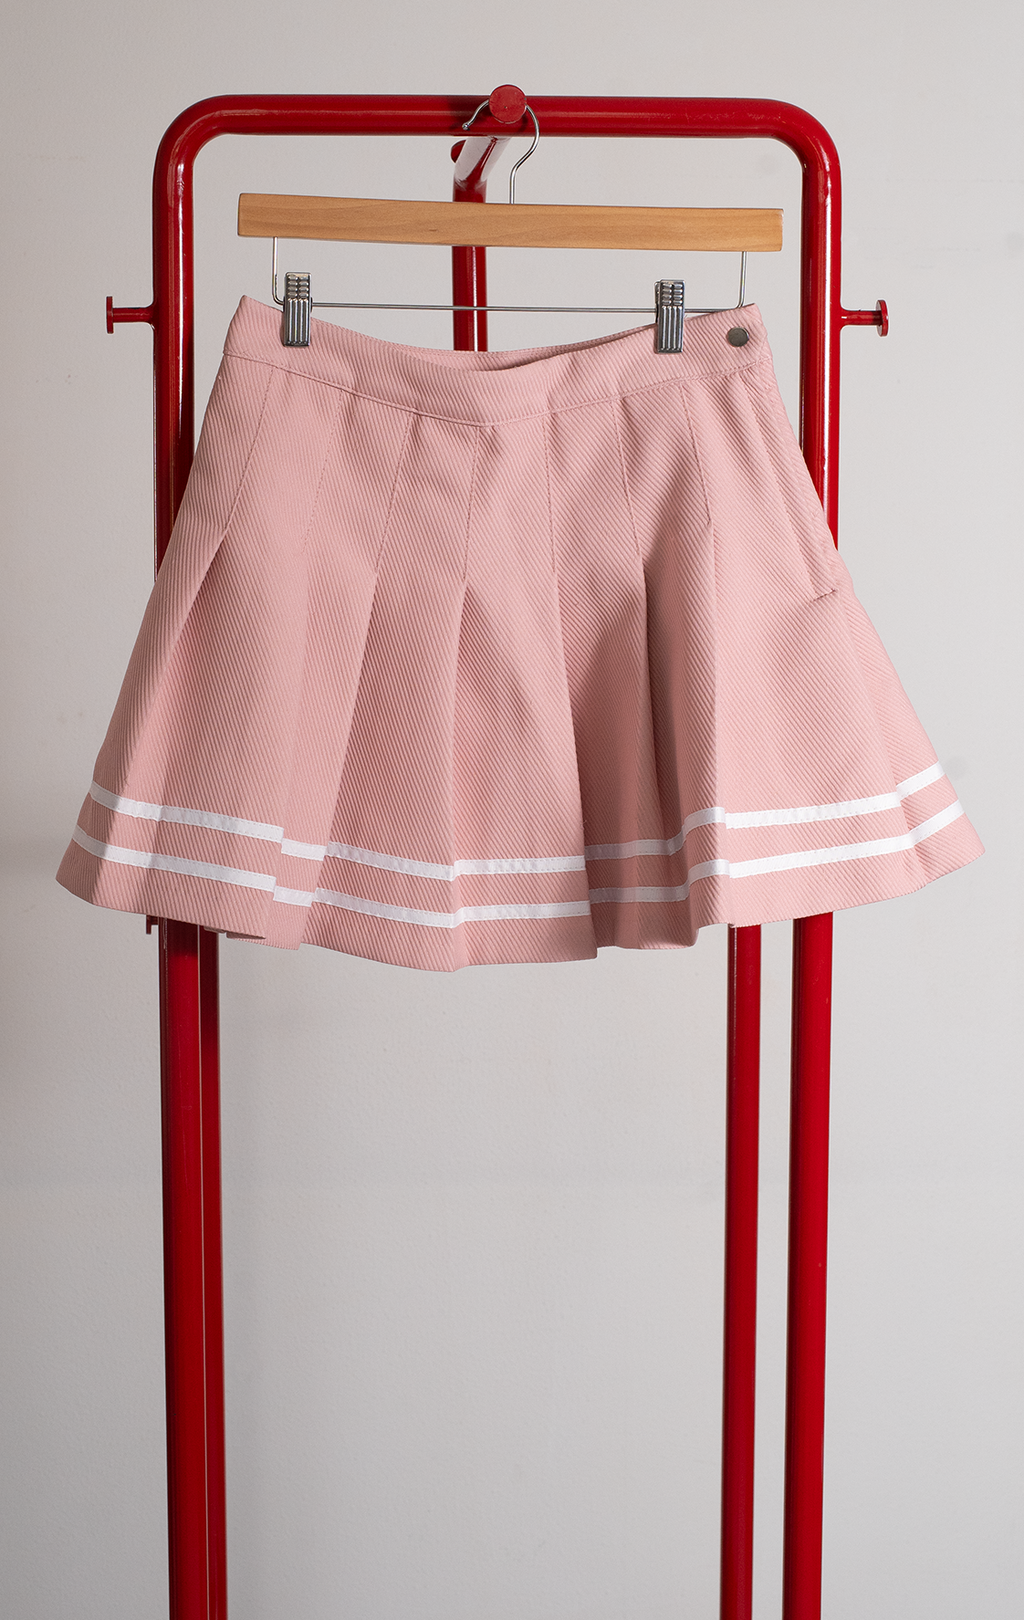 H&M SKIRT - Pink pleated with white lines - Medium